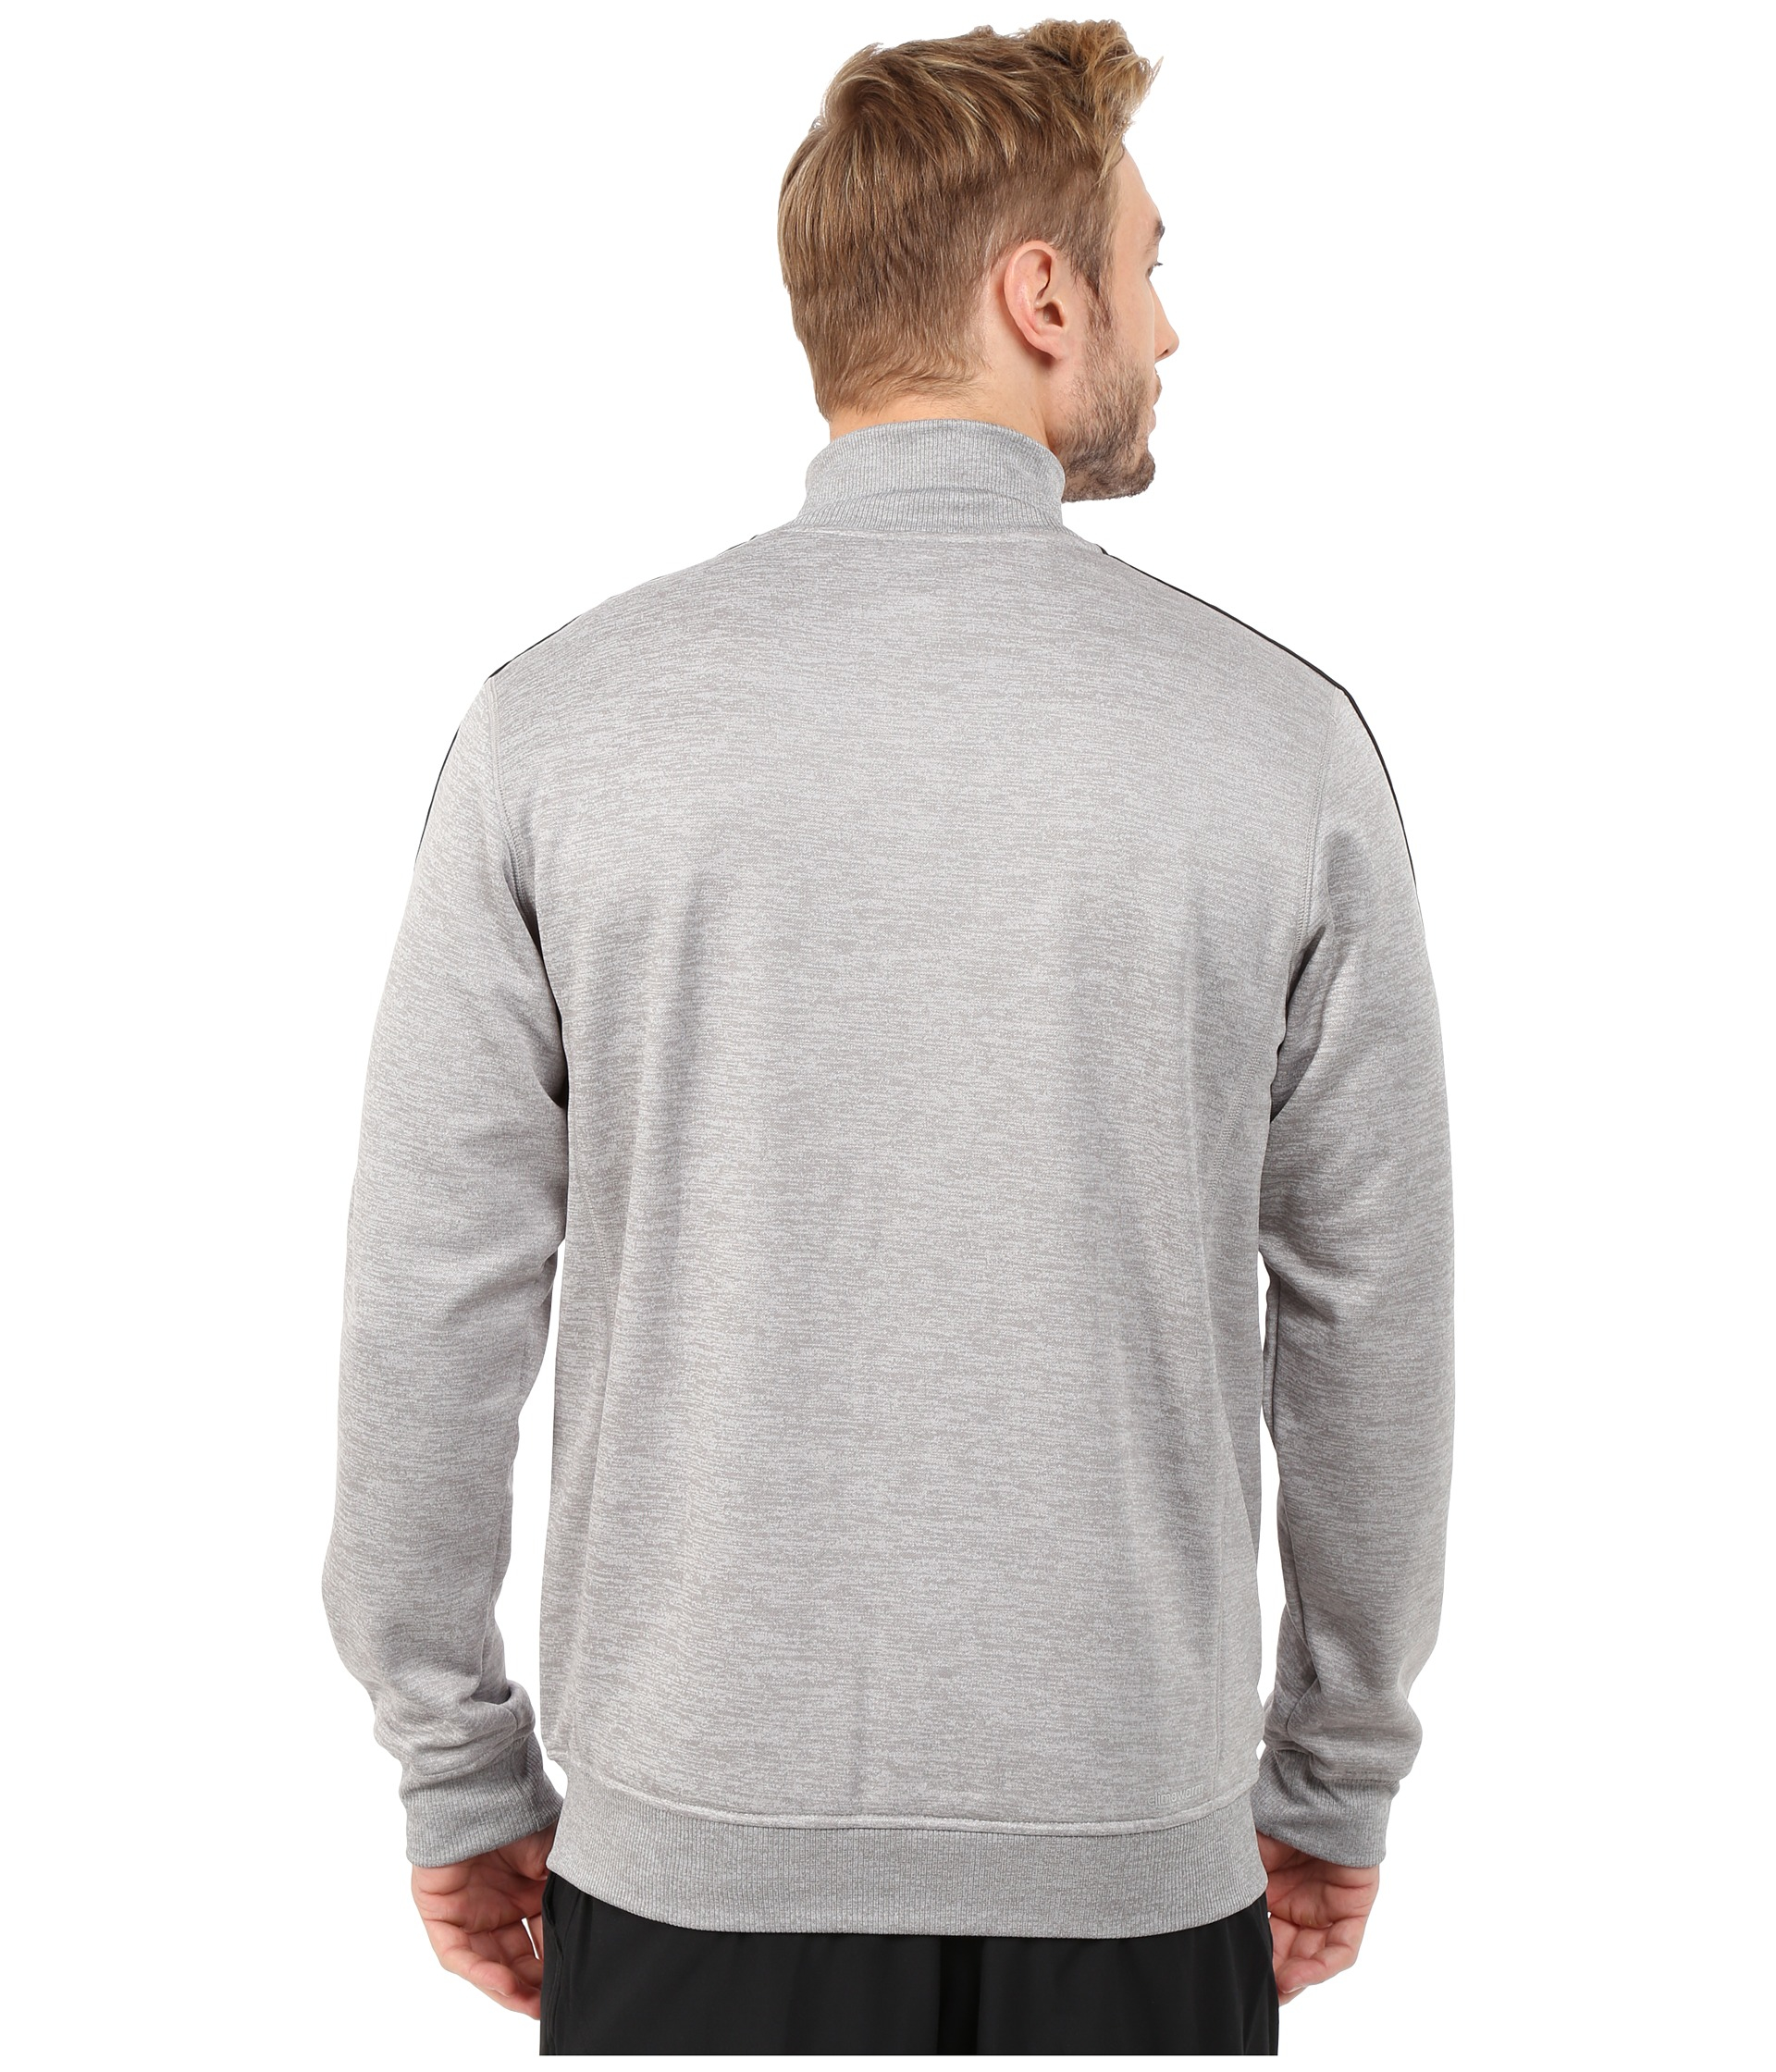 Lyst - Adidas Team Issue Fleece Track Jacket in Gray for Men